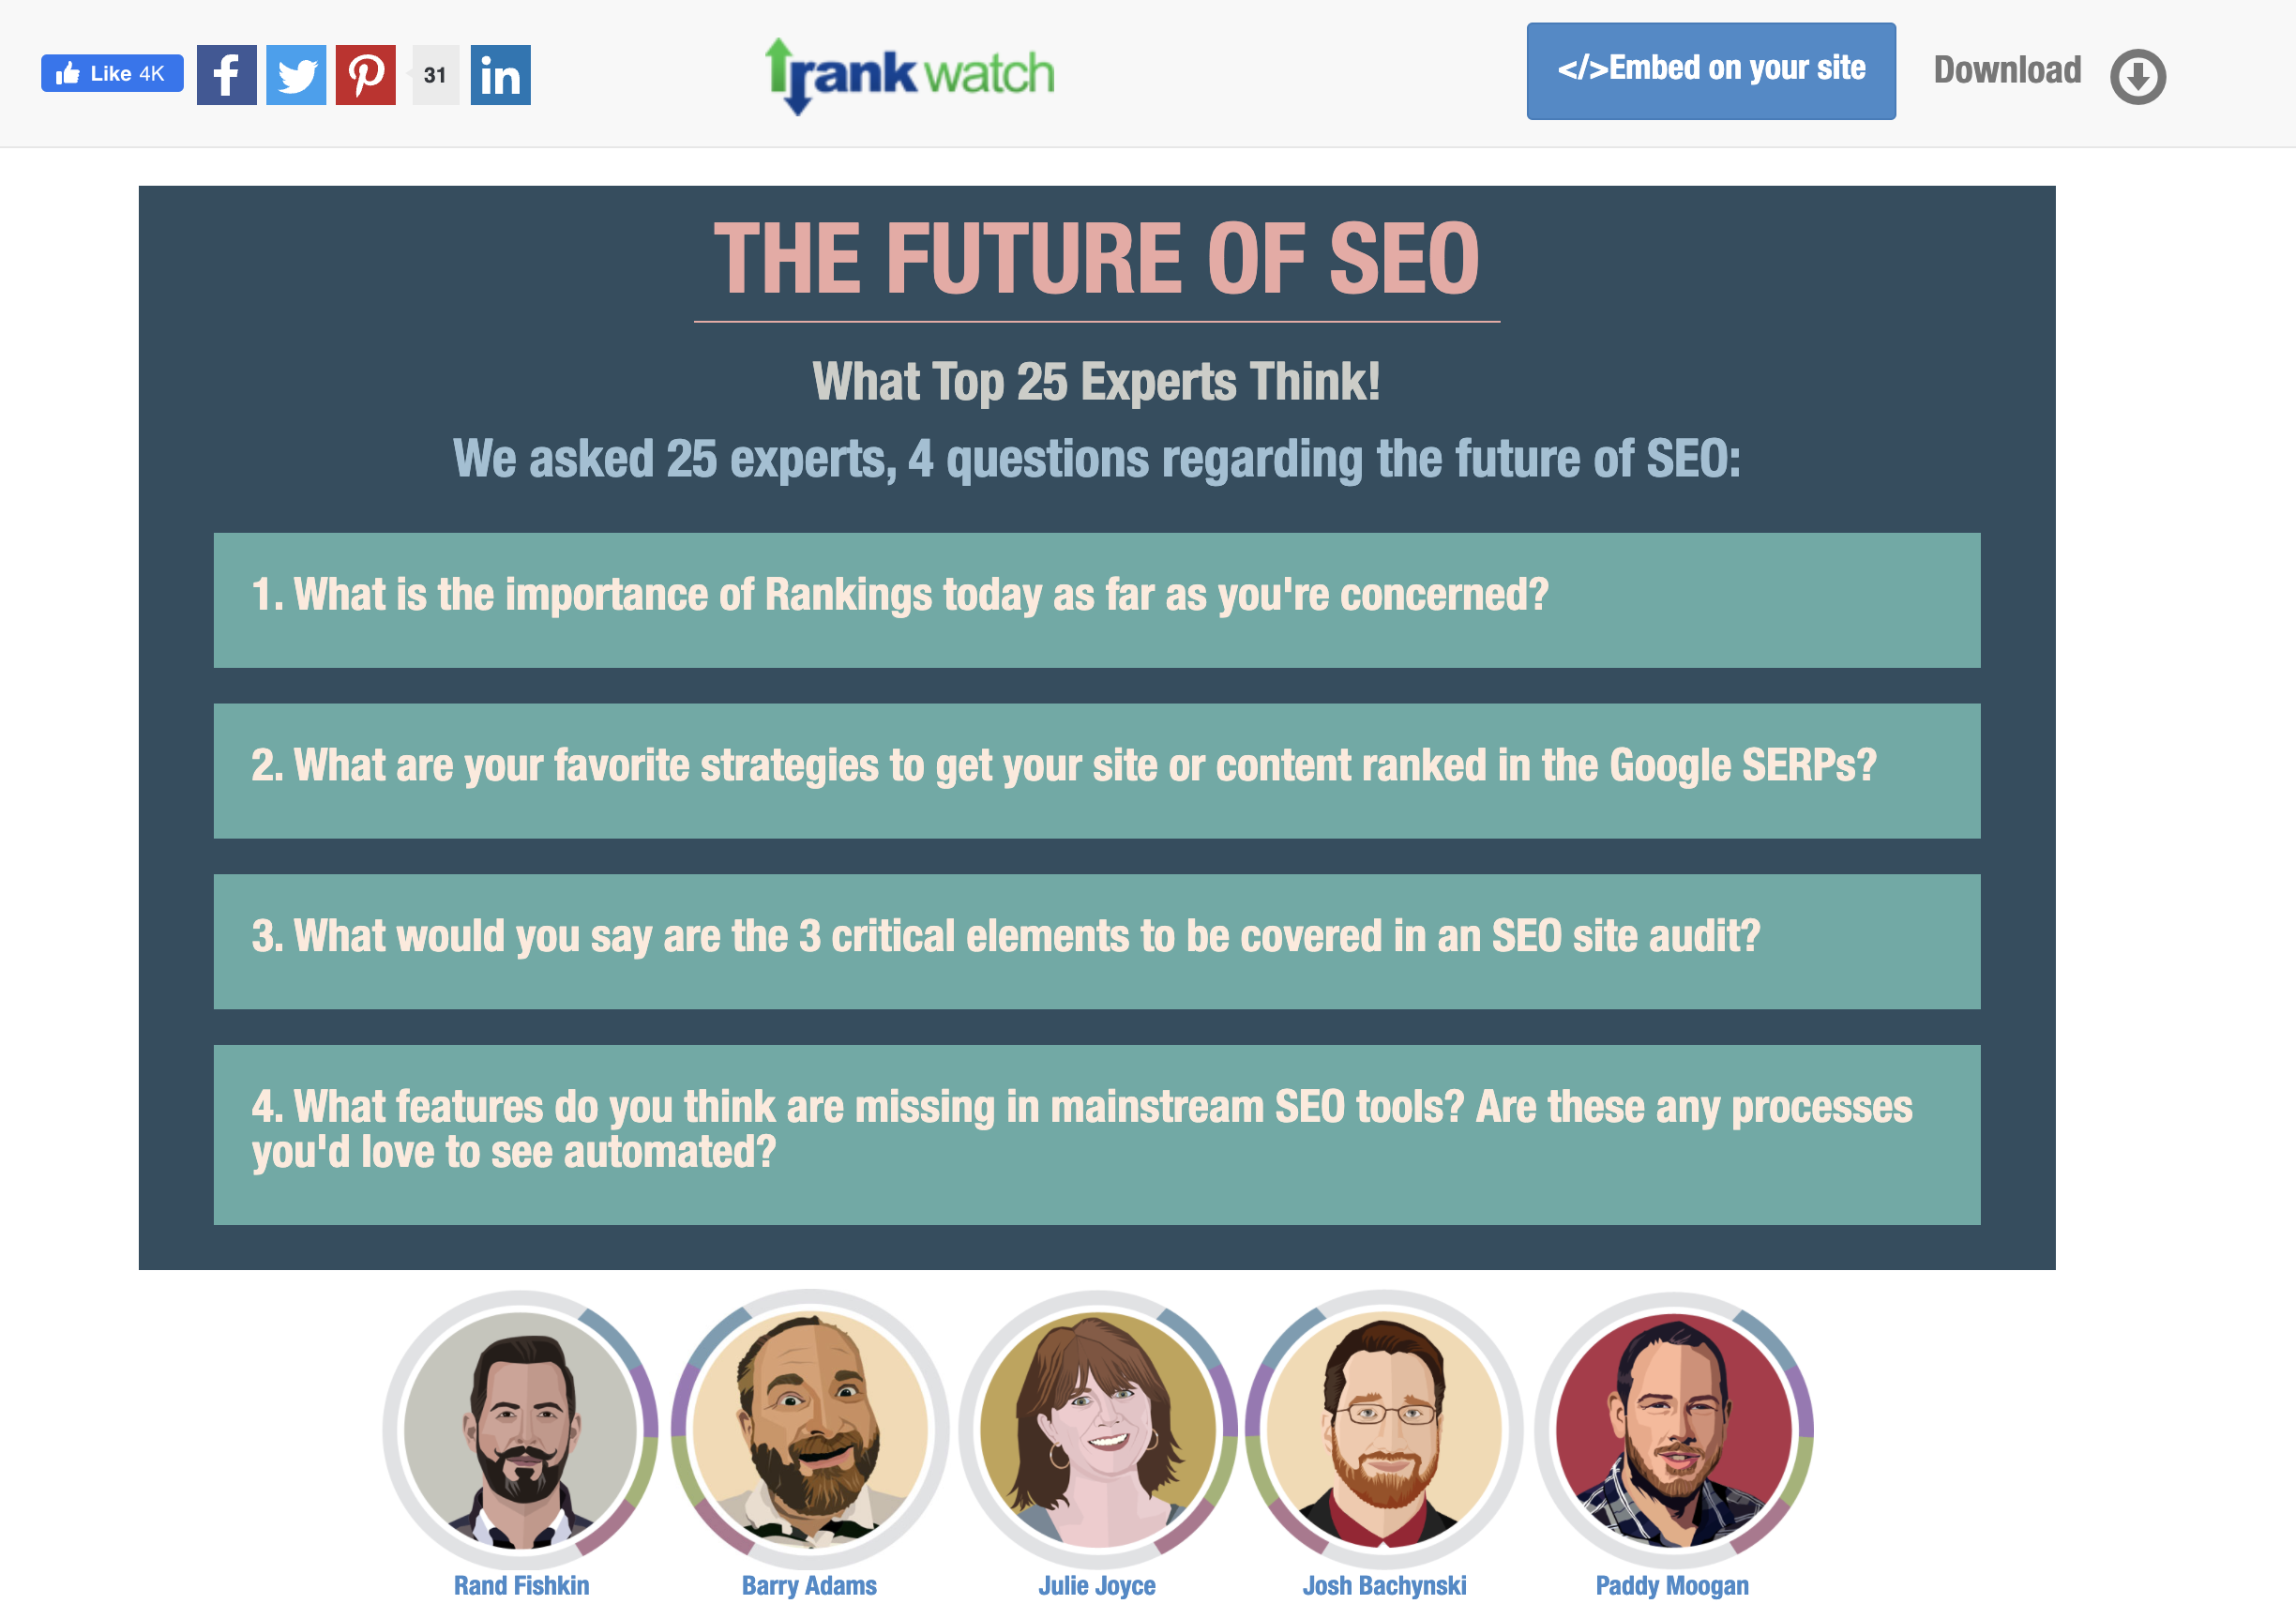 rank watch uses an influencer round-up post to gain links Link Building